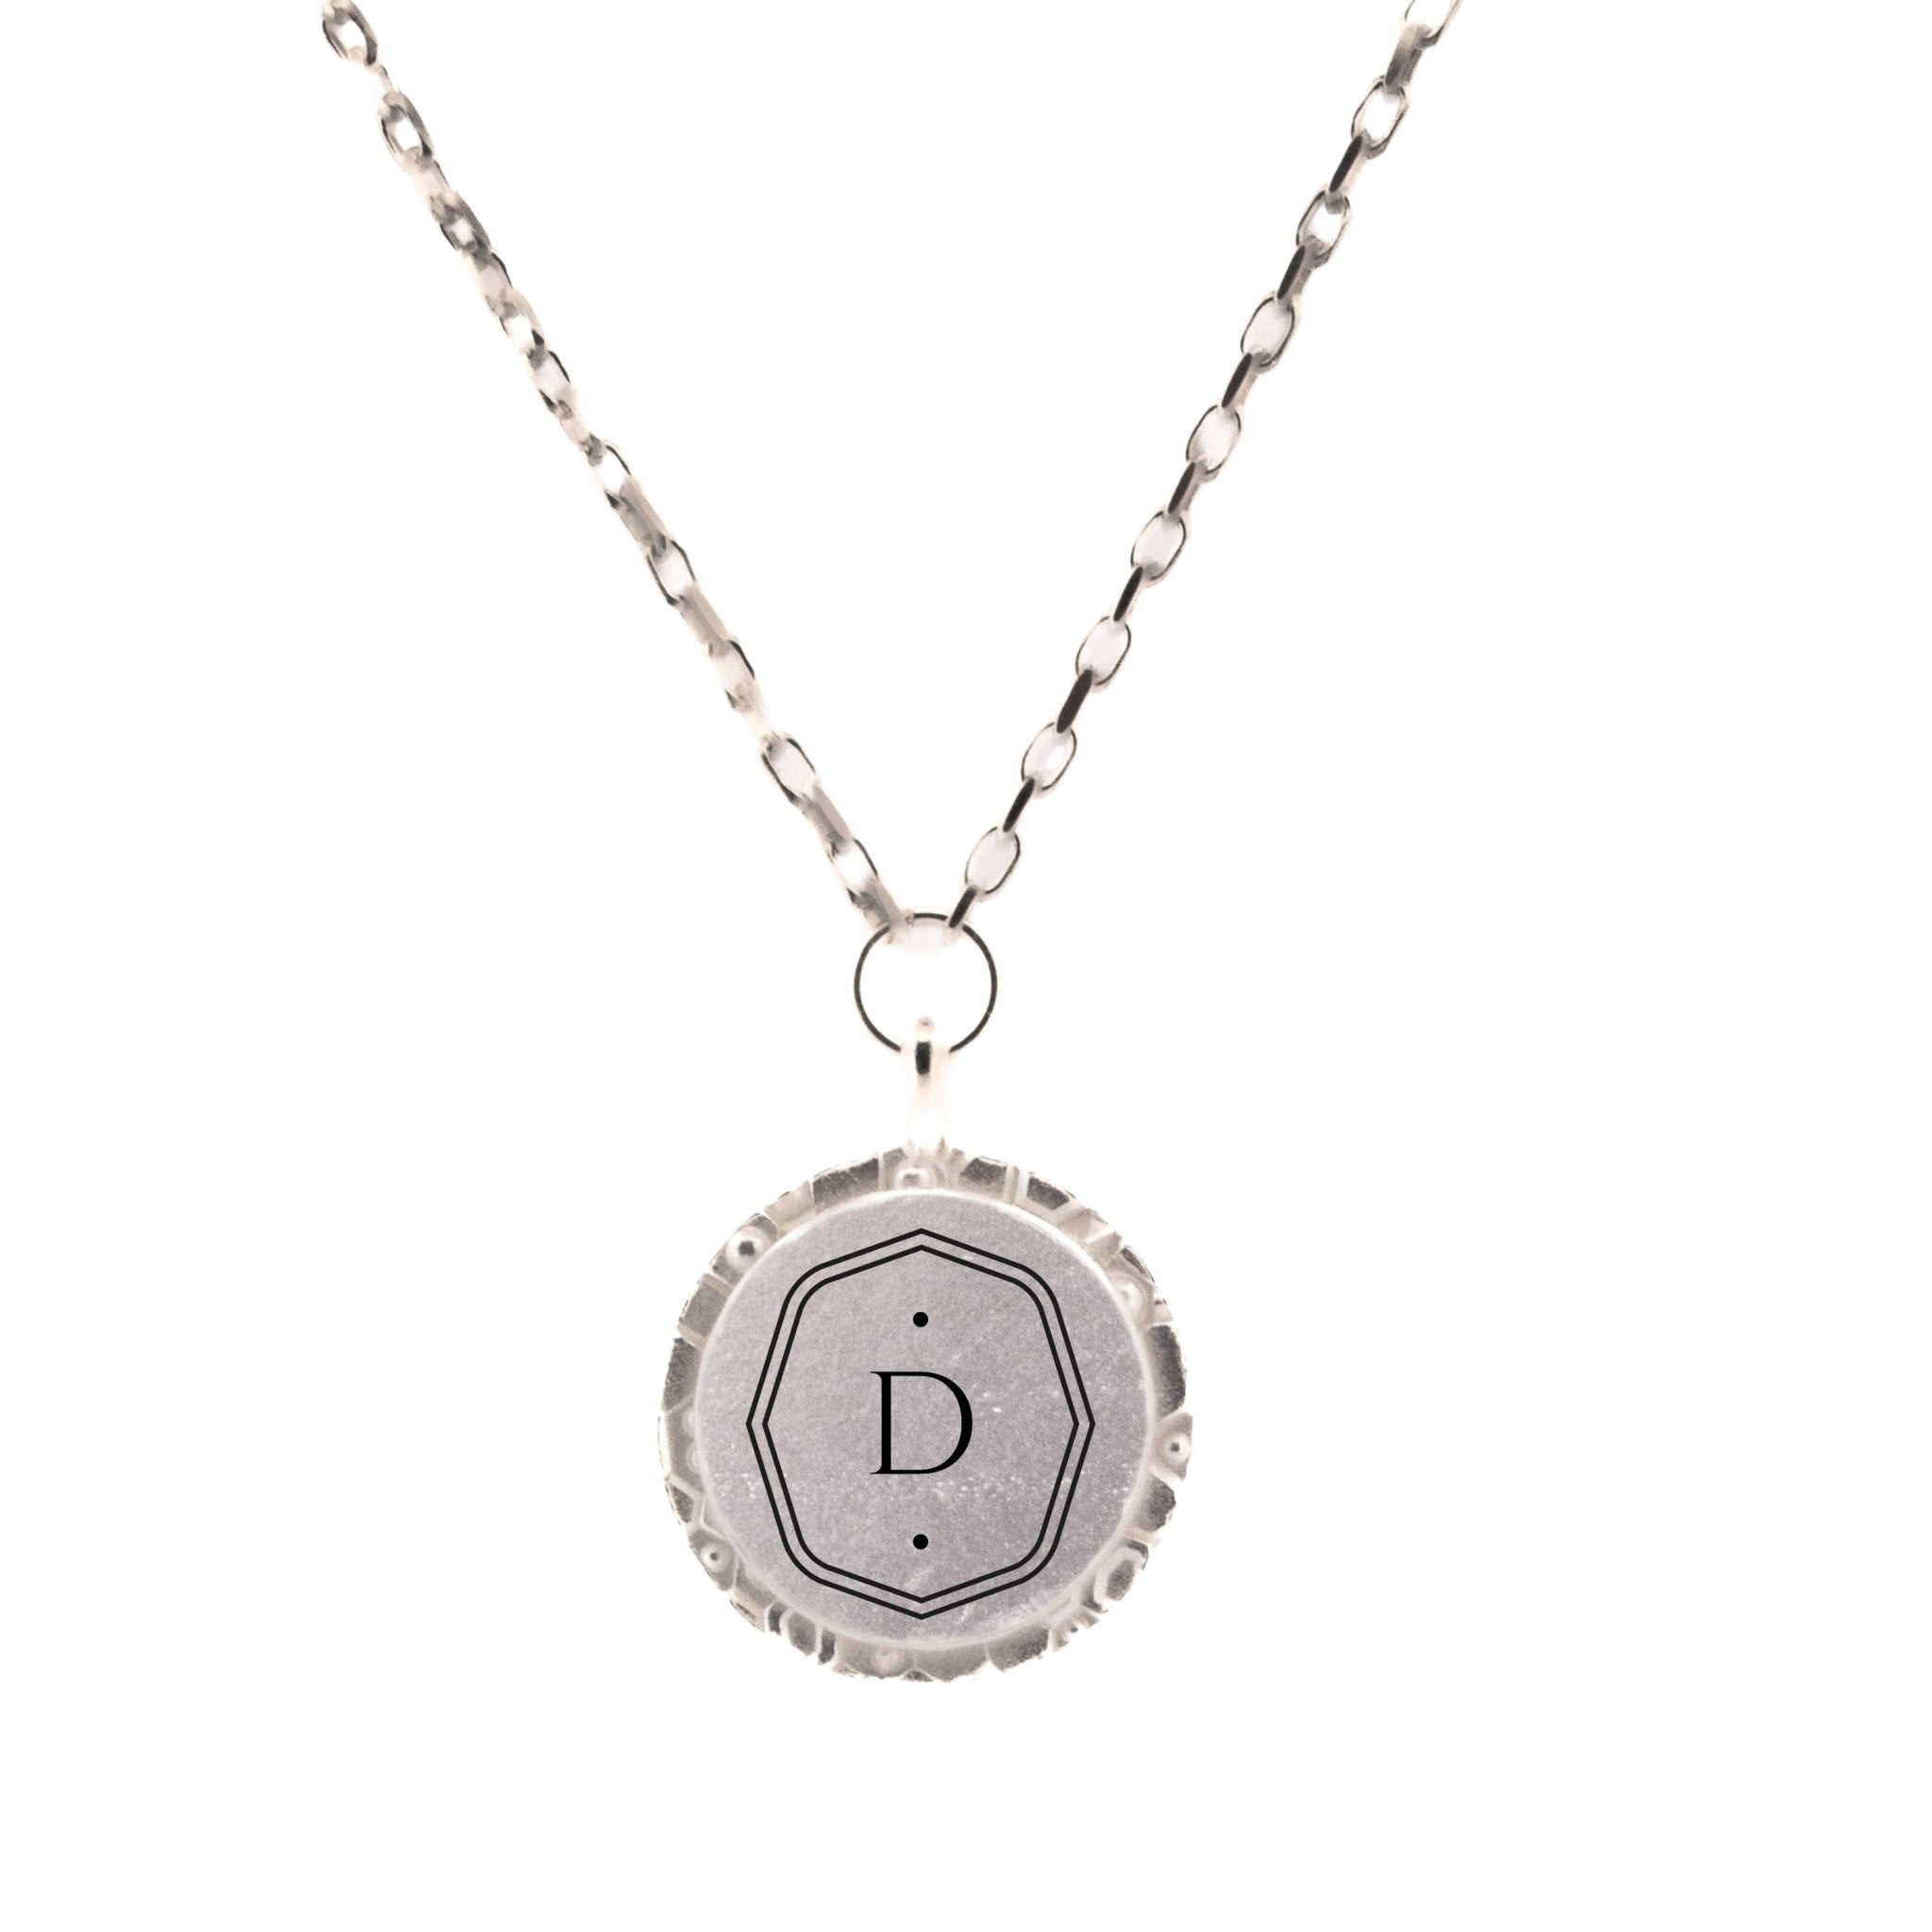 Utopia Personalised Necklace - Dainty London